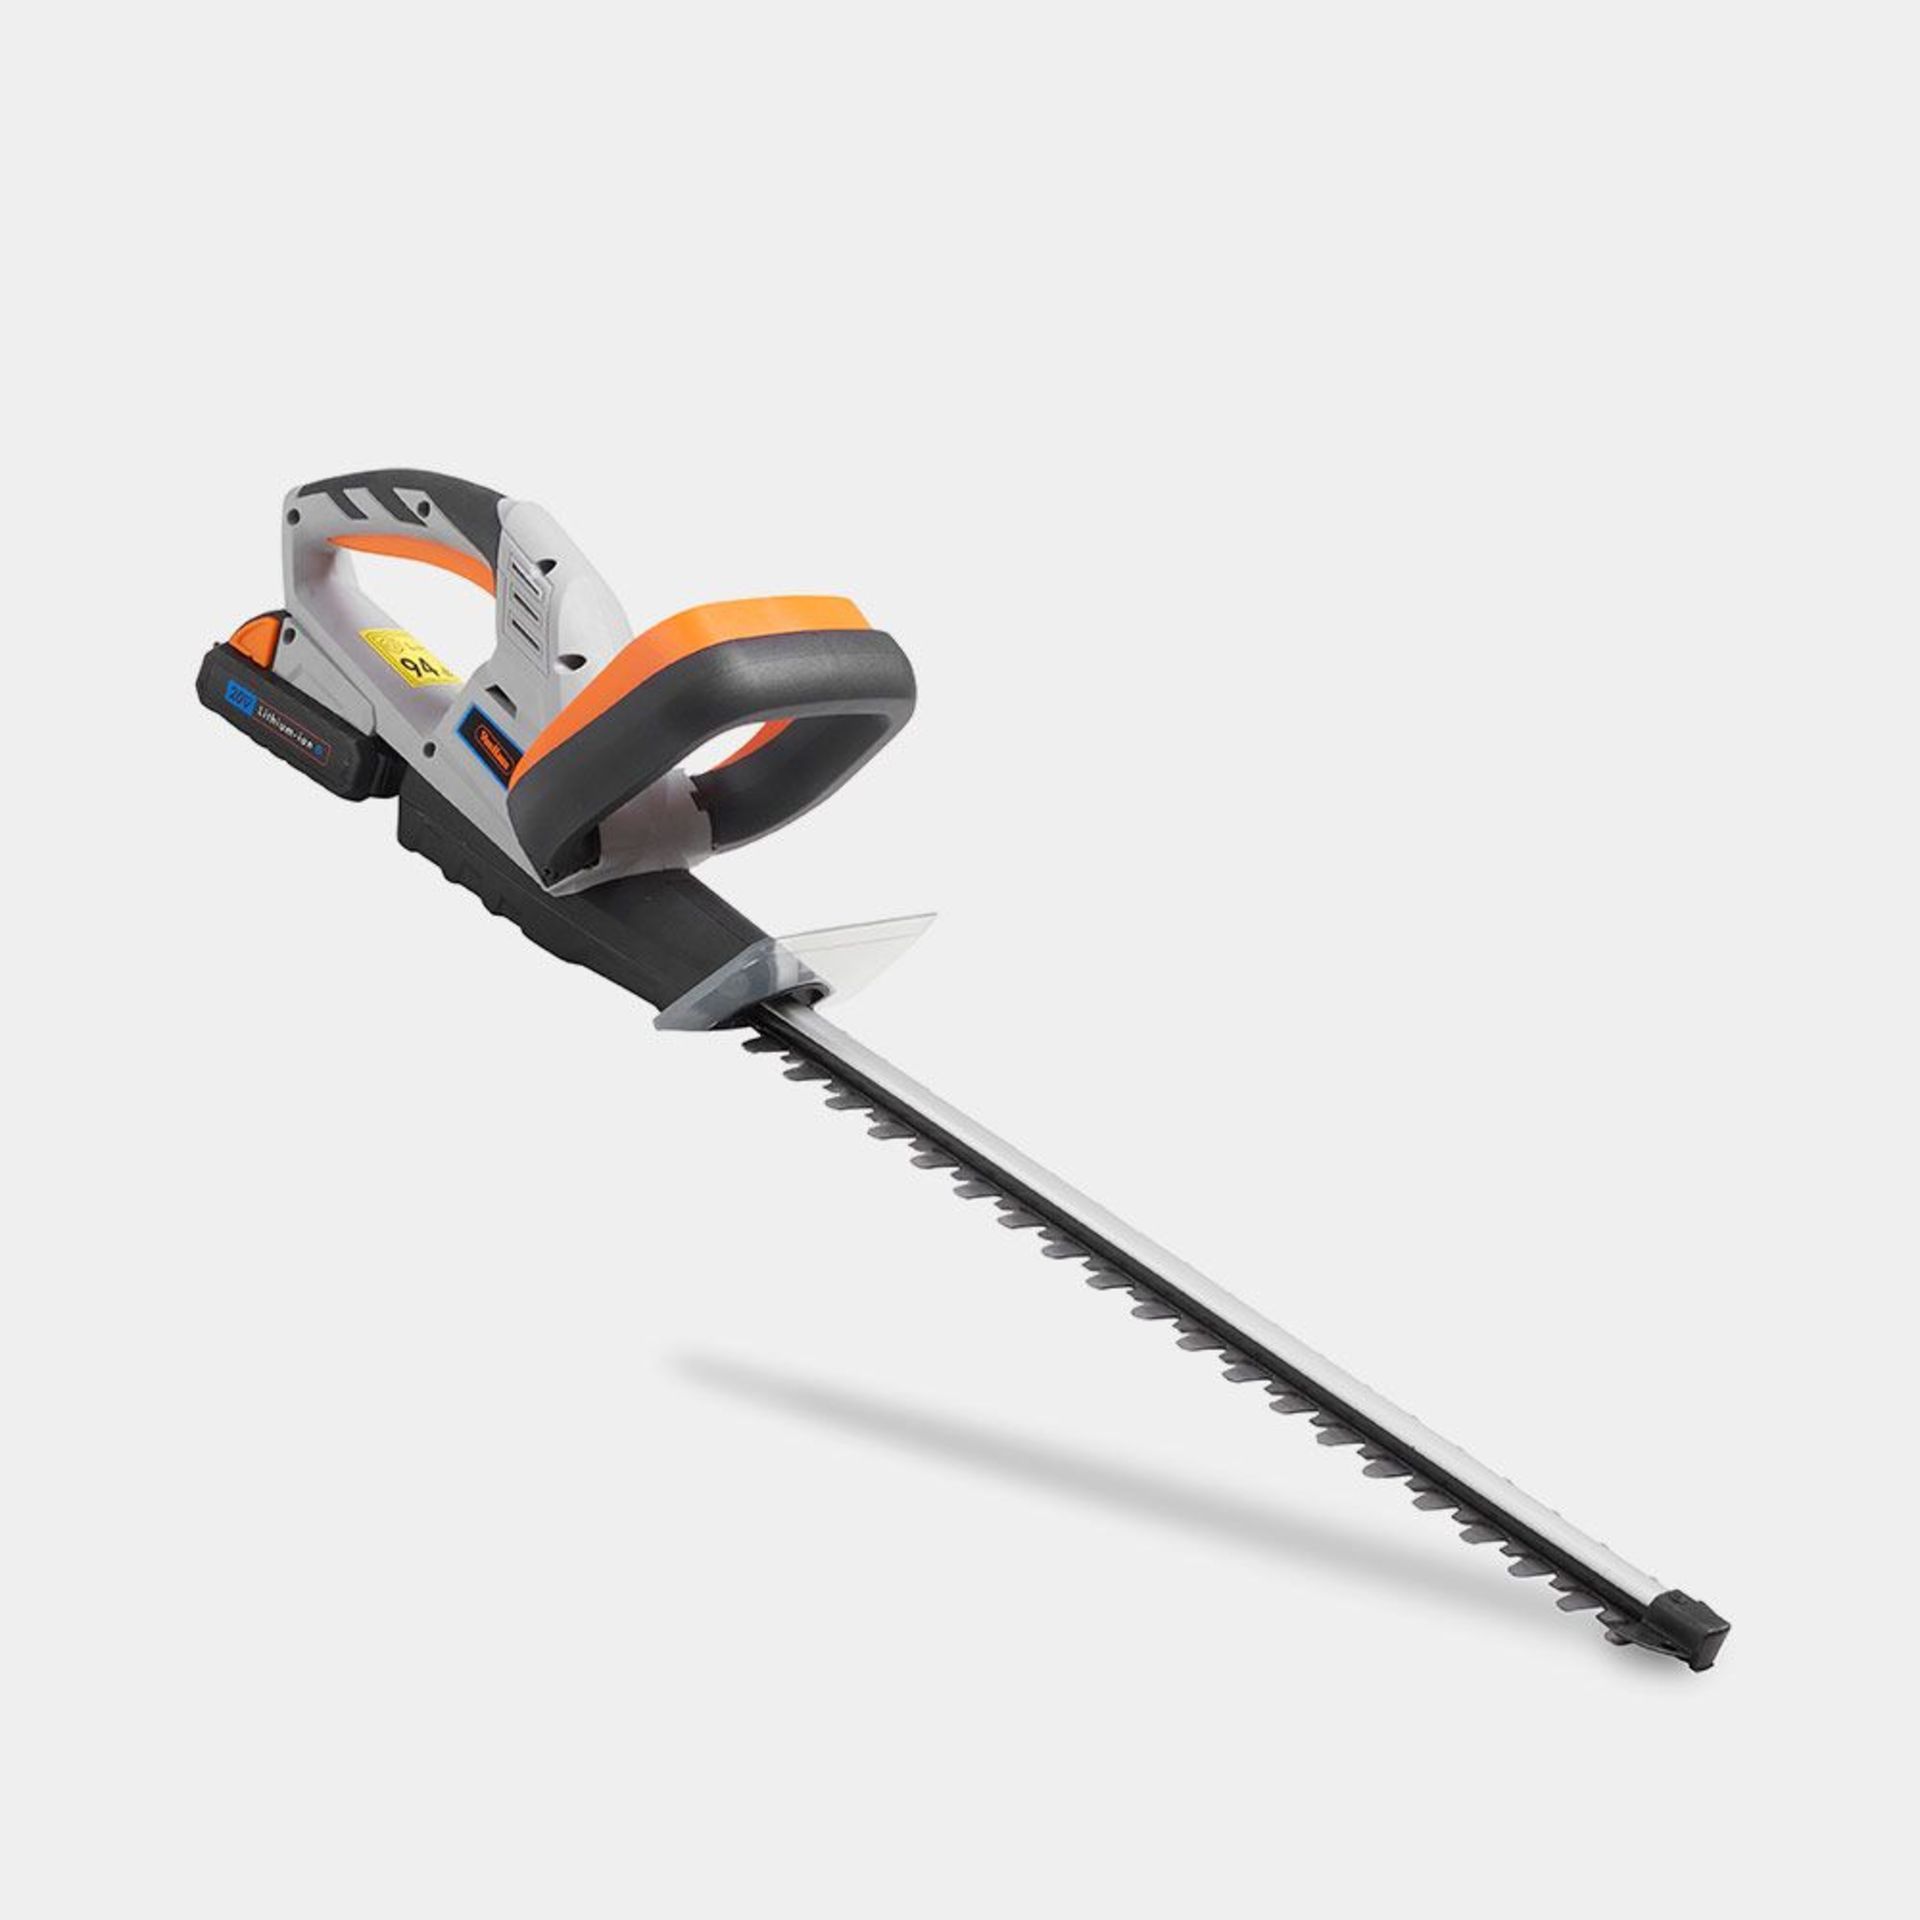 G-series Cordless Hedge Trimmer. - R8. Don’t waste your energy with manual hedge trimming. The